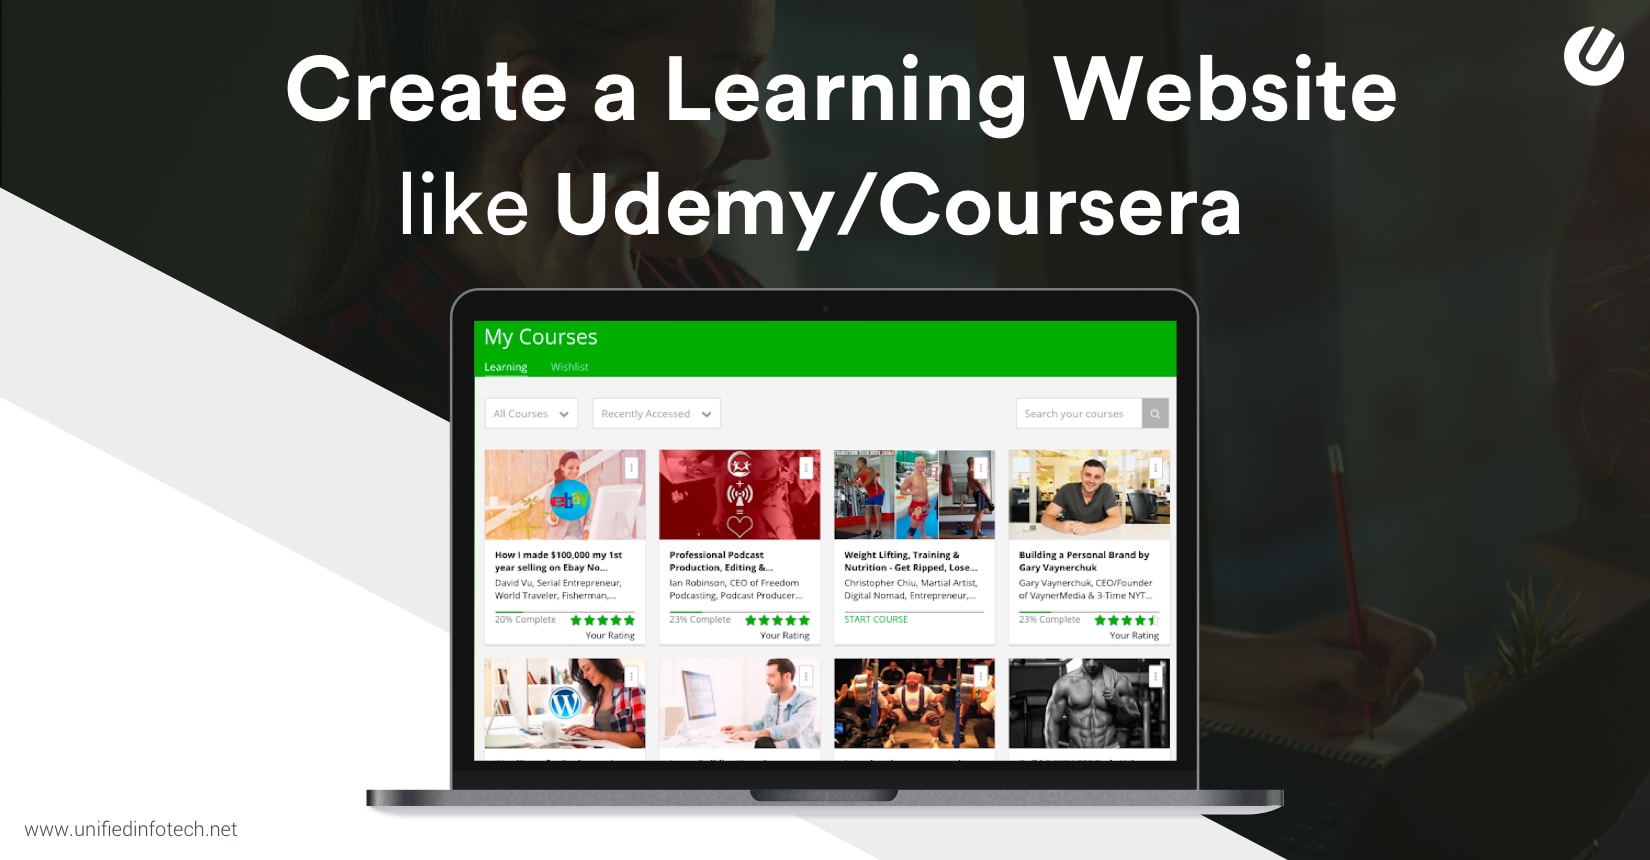 7 Easy Ways to Build Your eLearning Website like Udemy or Coursera